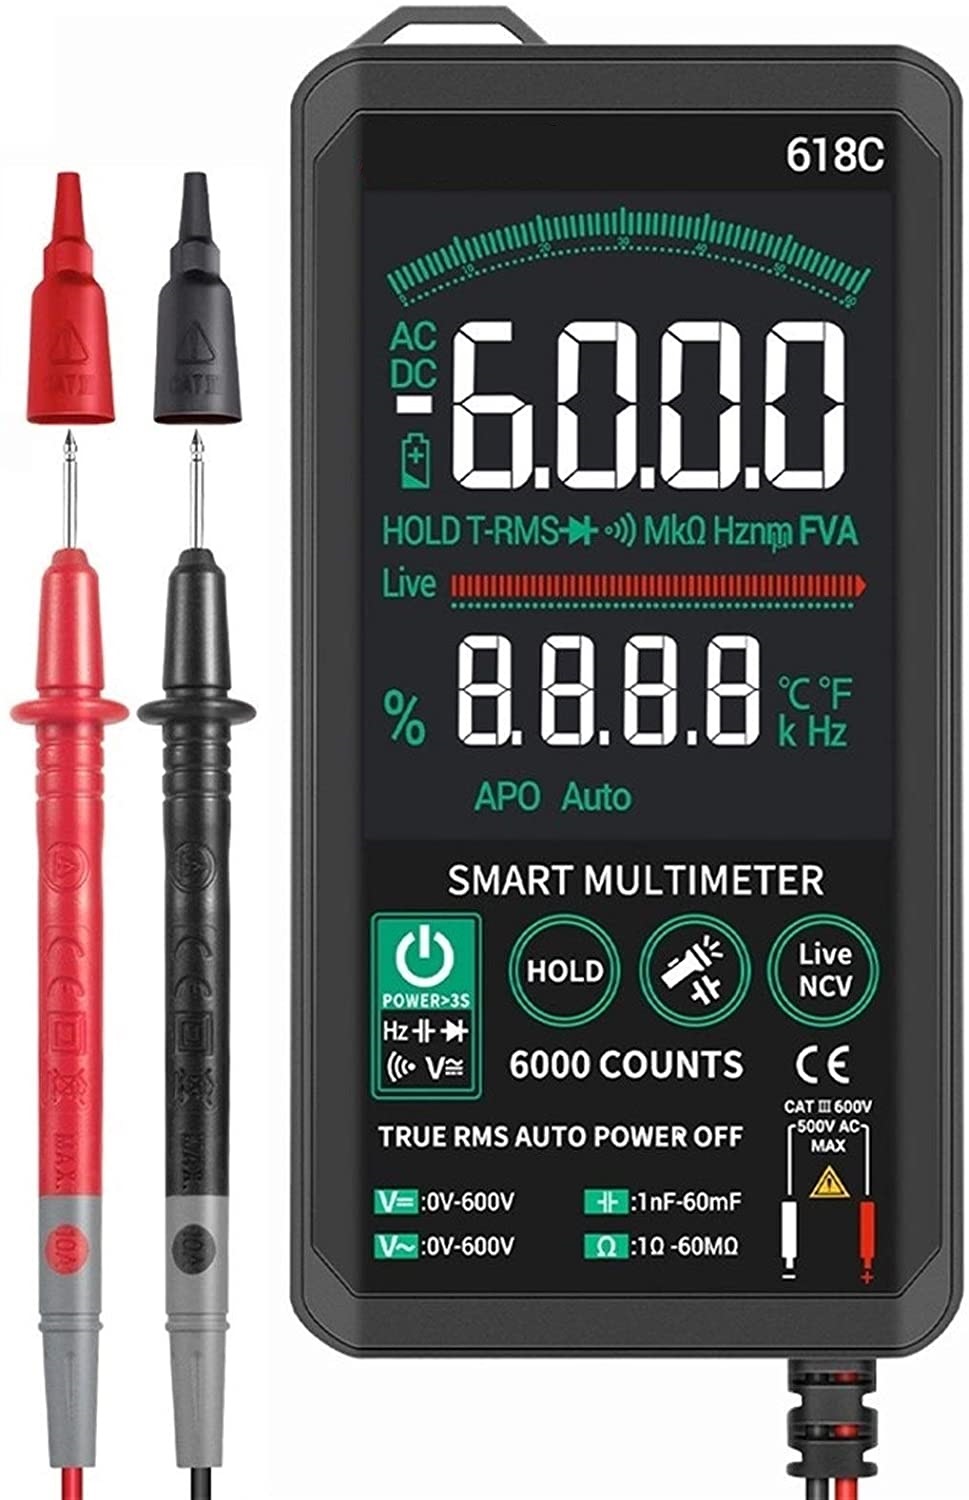 618C Digital Multimeter Auto-Ranging 4.7” LCD Touch Color Display Intelligent TRMS Handheld Multimeter AC/DC Voltage Resistance Frequency Capacitance Meter Diode with NCV, Flashlight and 2xAAA Battery